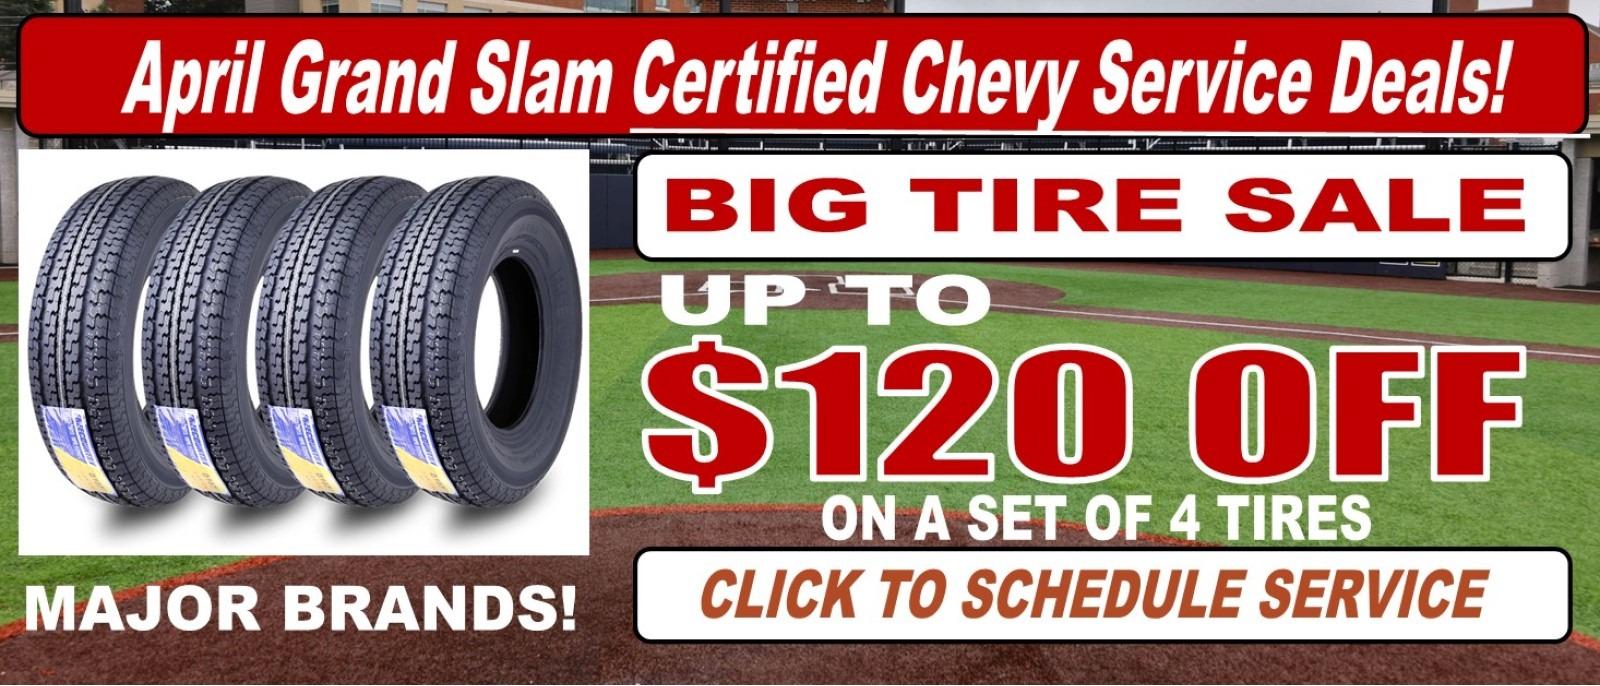 Up To $120 Off On A Set Of 4 Tires